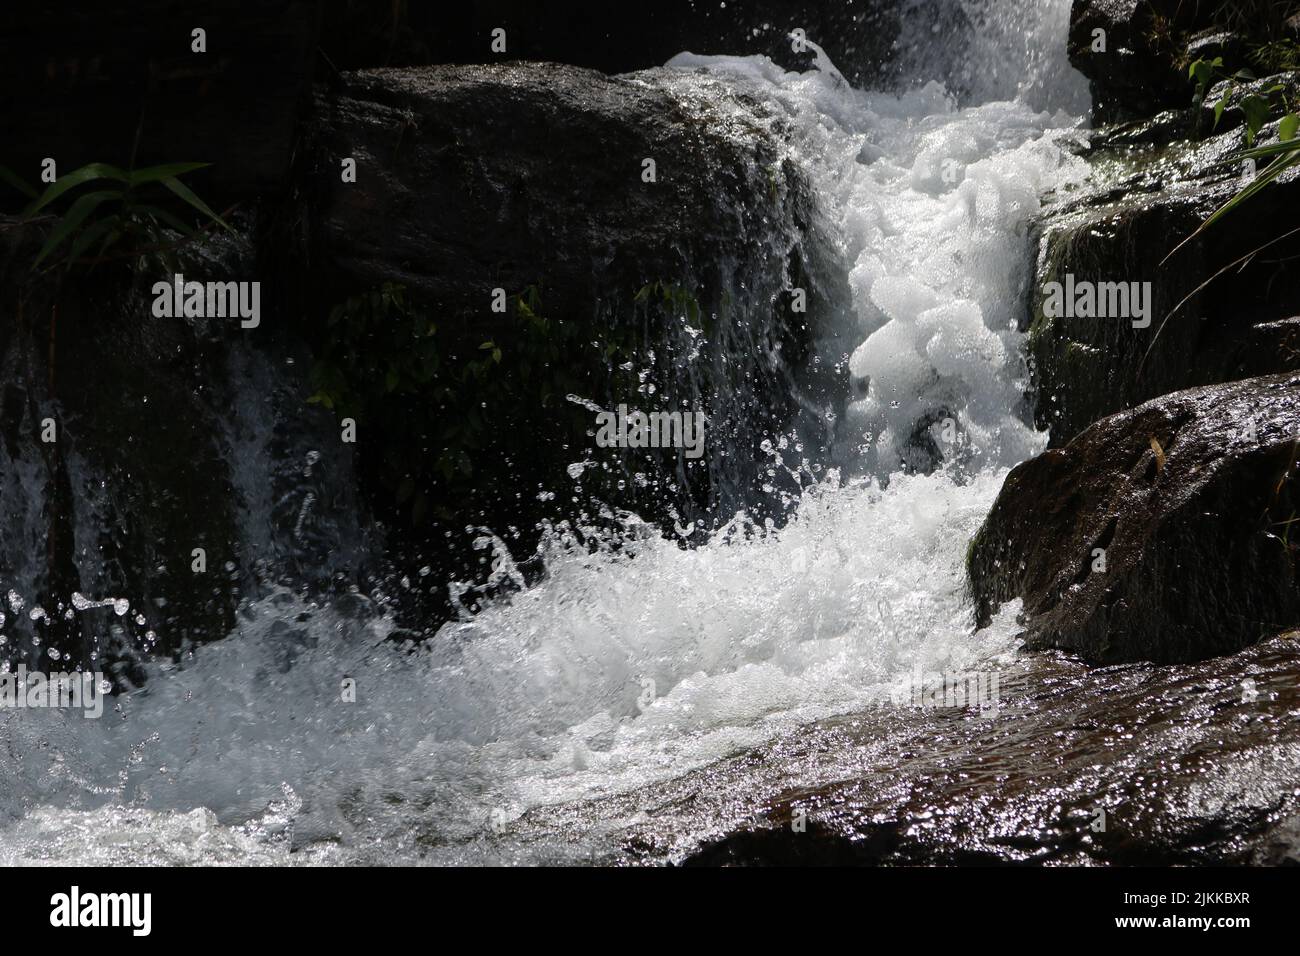 A beautiful shot of a streaming river coming out of in the middle of rocks. Stock Photo